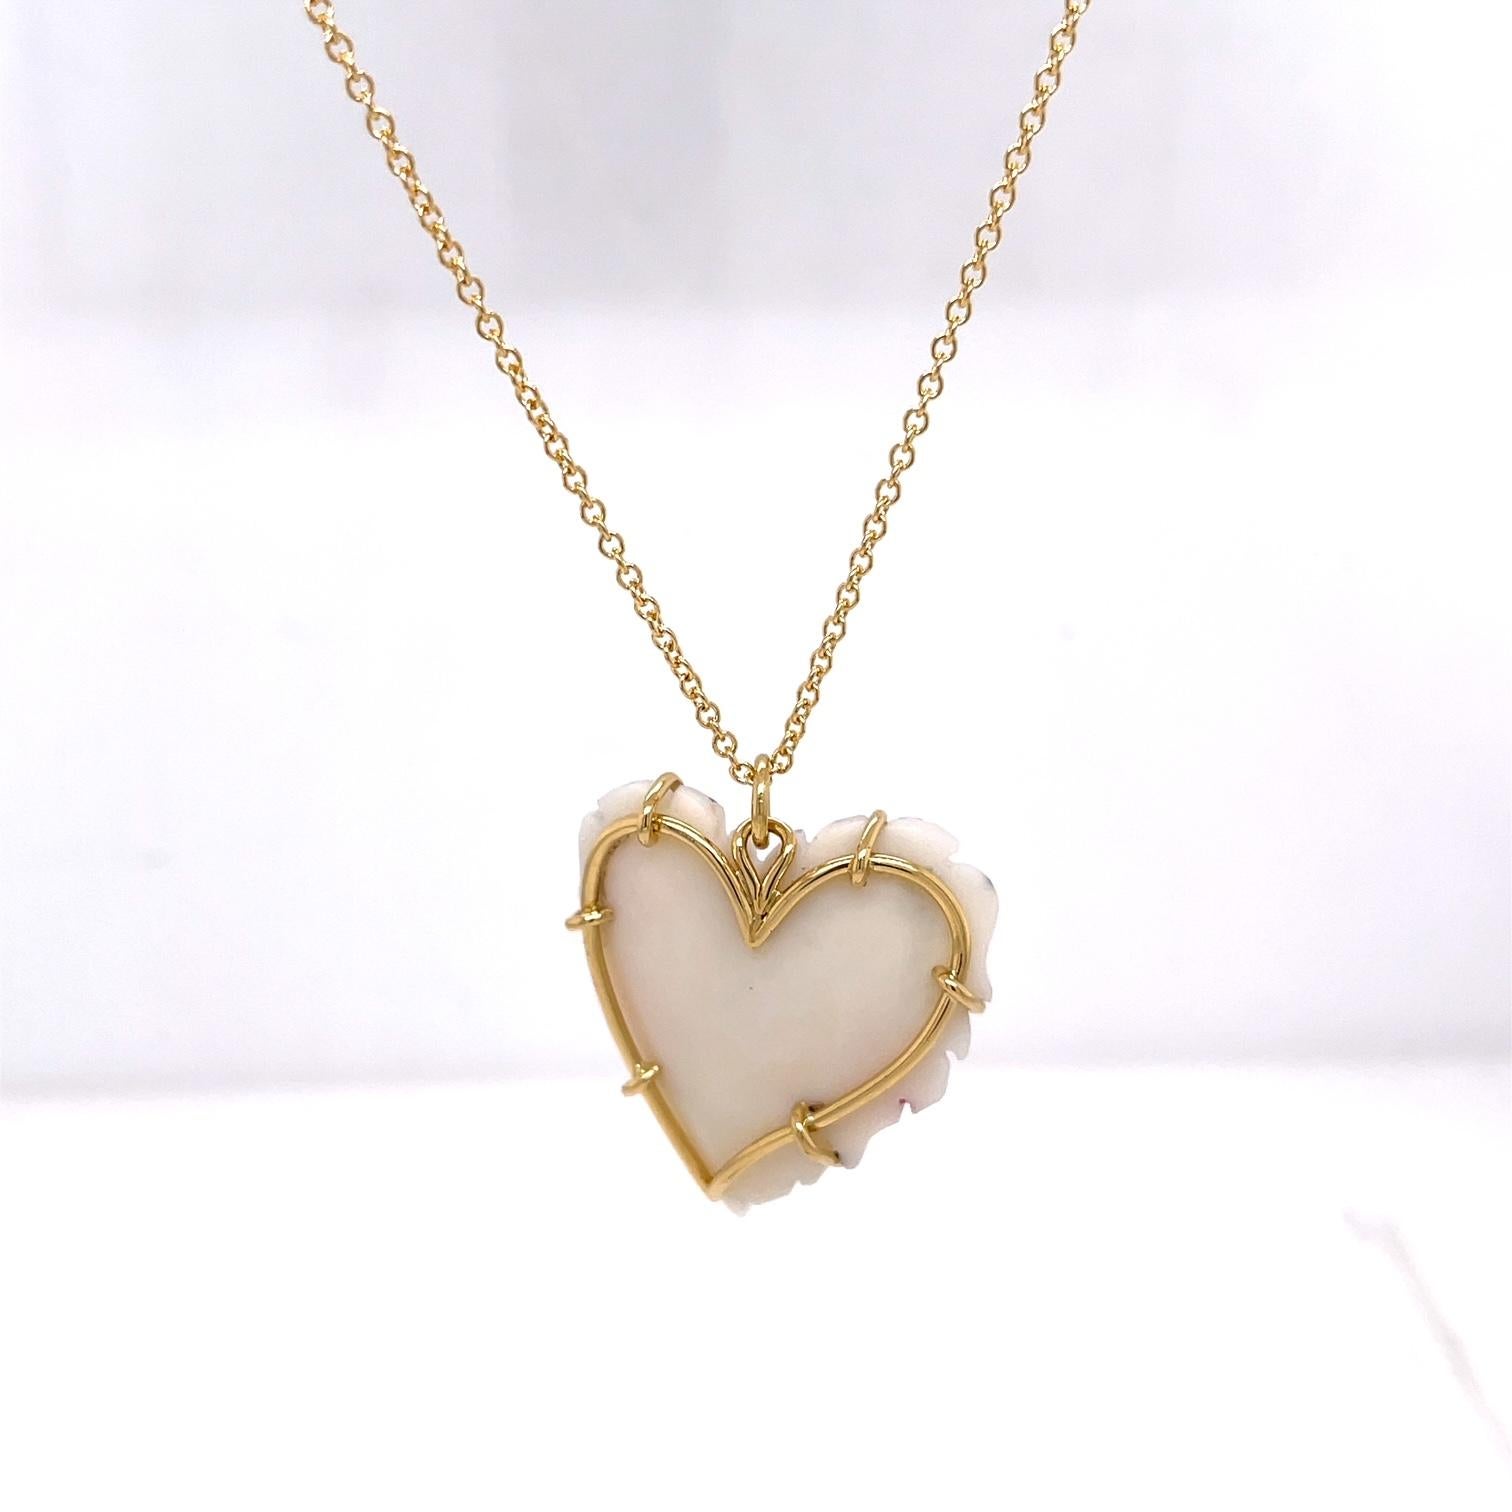 Contemporary 18k Yellow Gold White Speckled Carved Druzy Heart Pendant For Sale